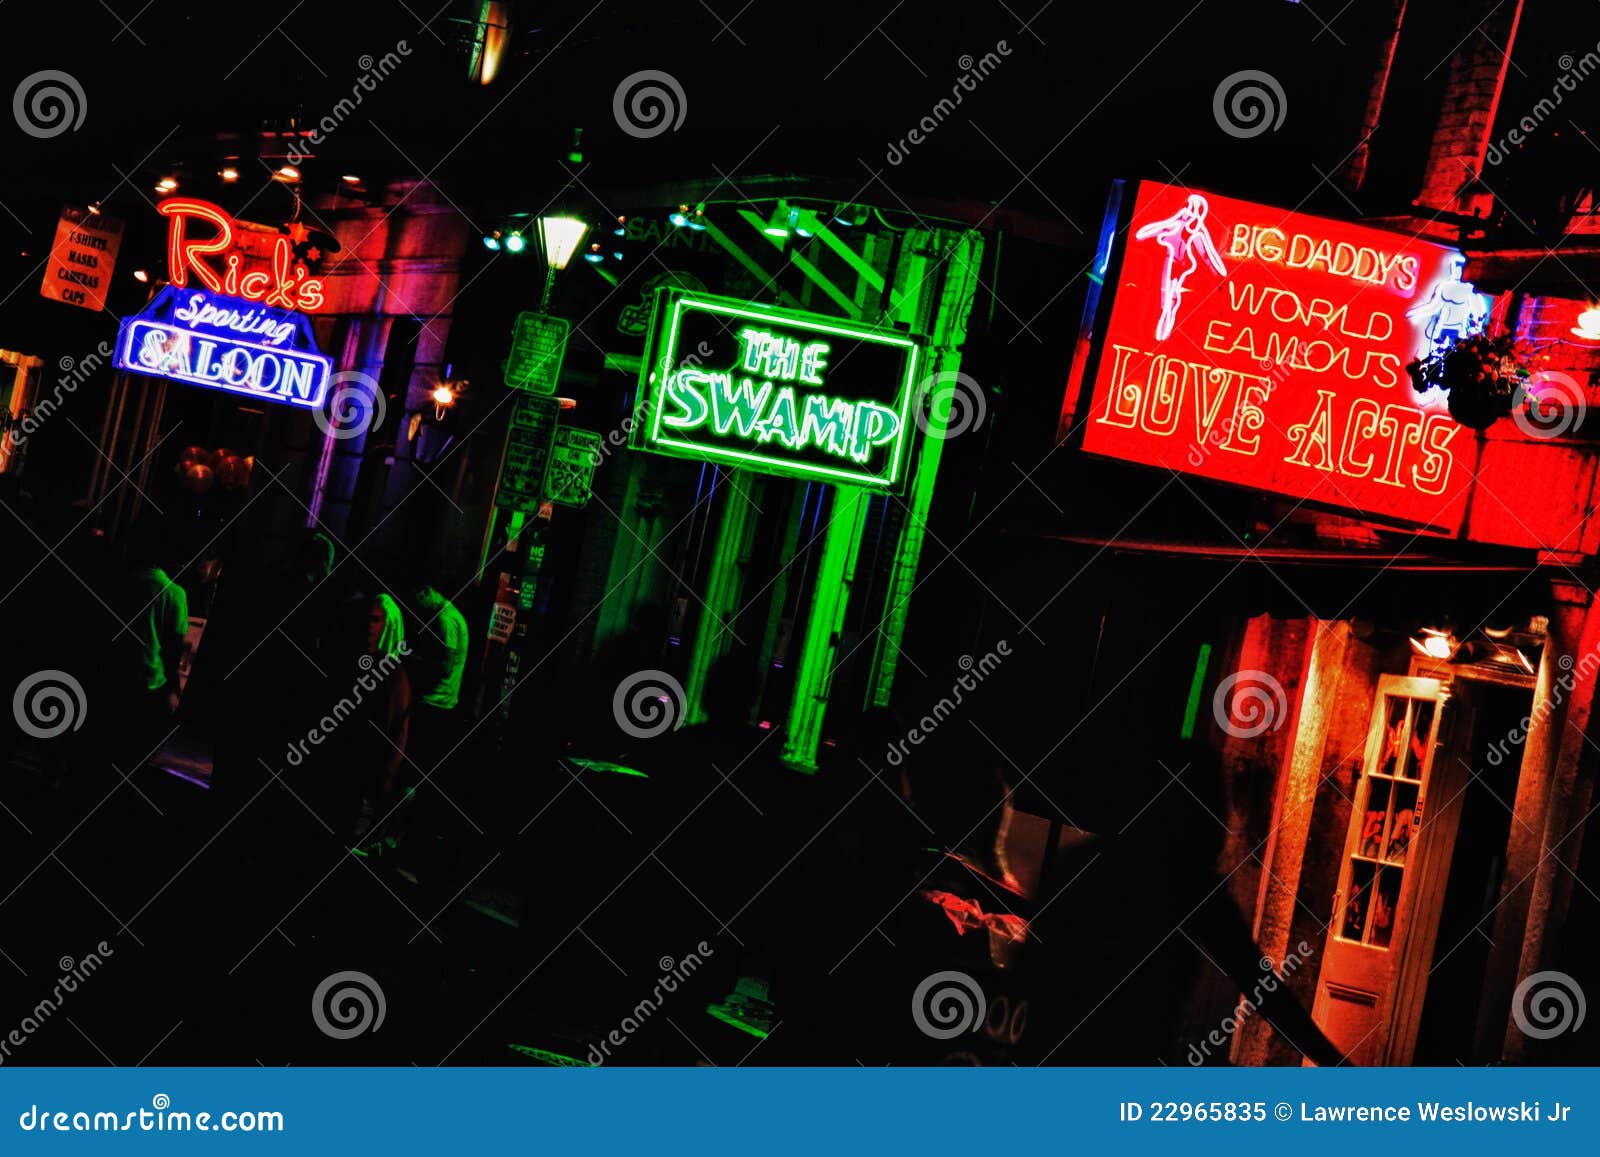 New Orleans Bourbon Street Bars and Sex Clubs Editorial Image